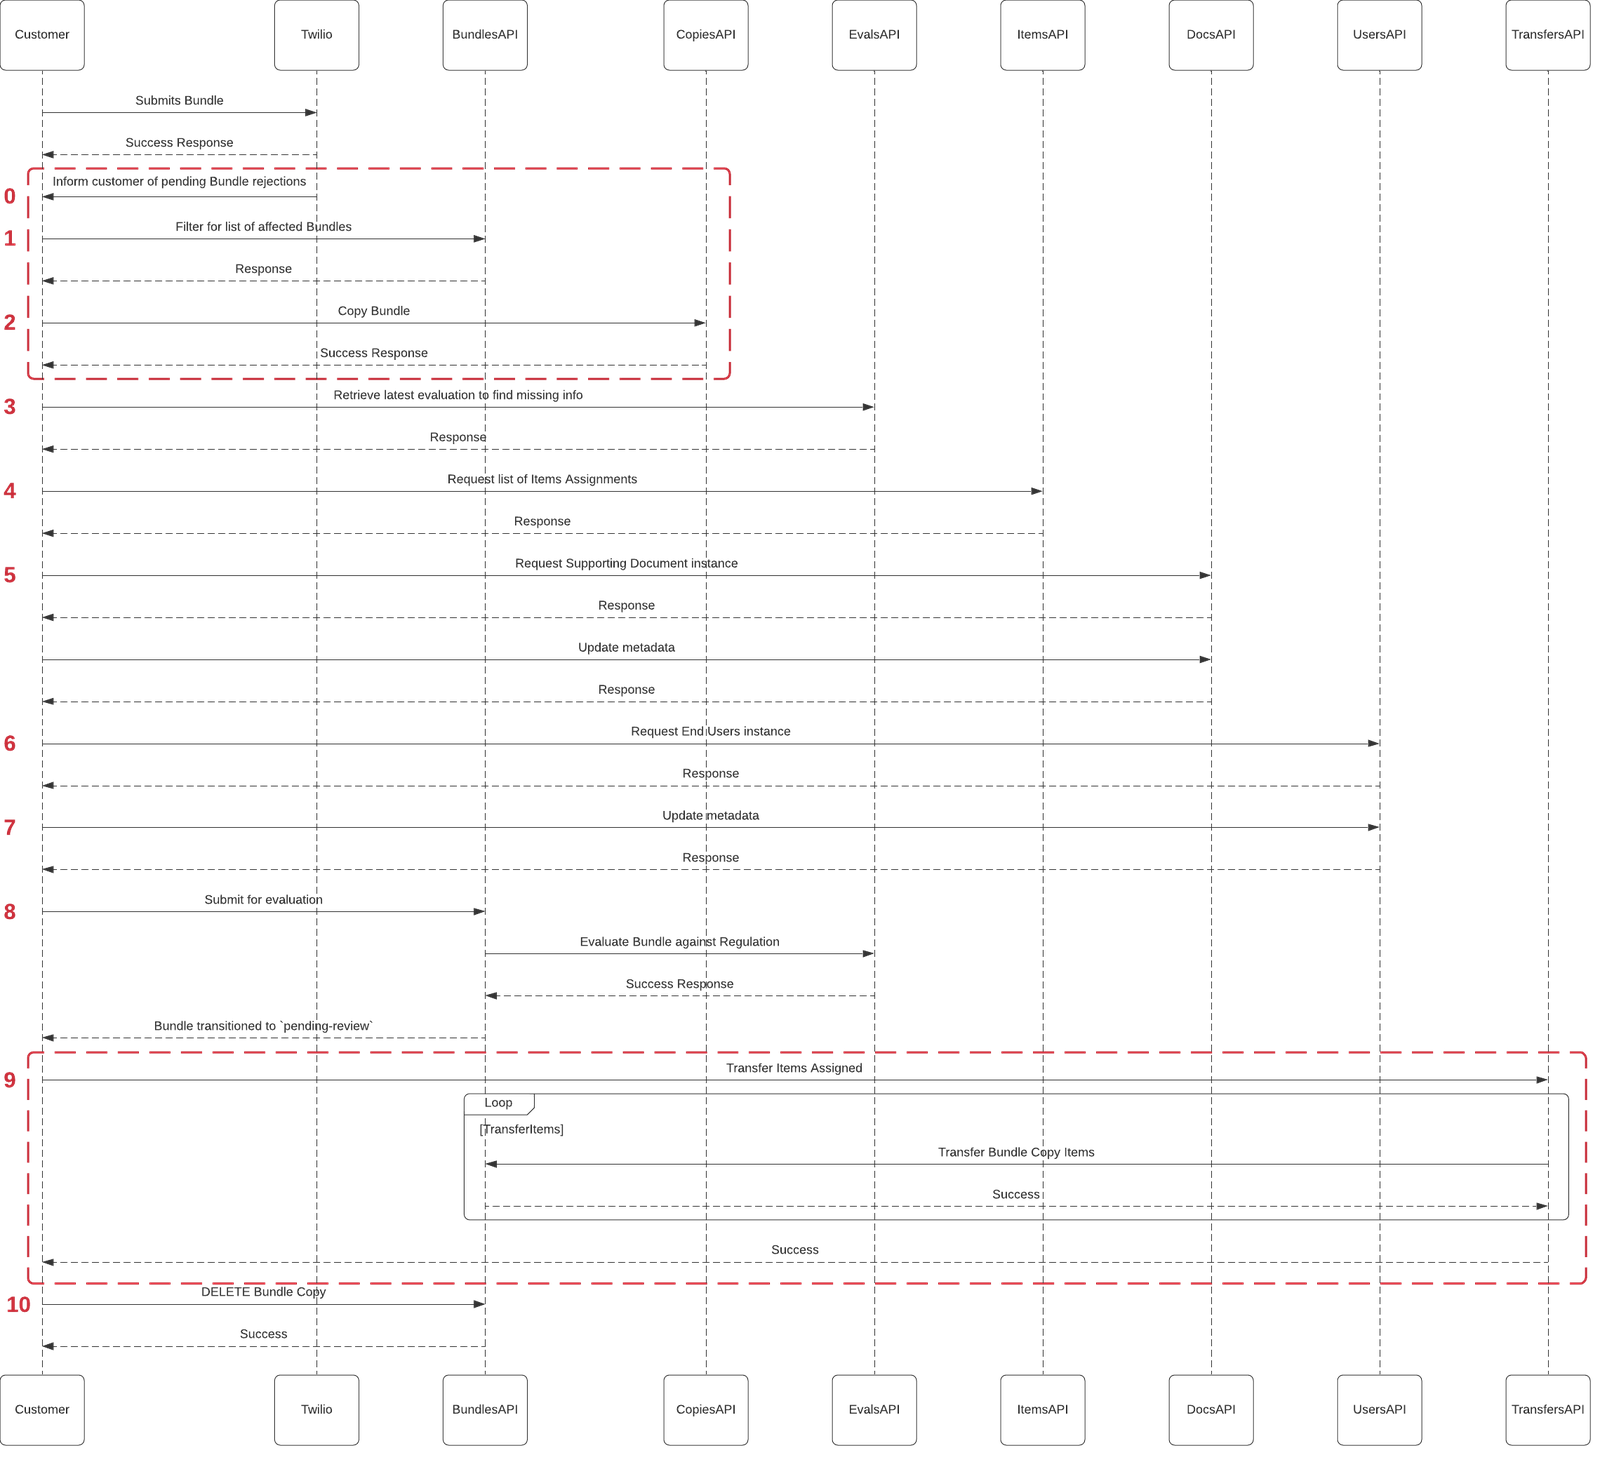 Compliance Information Update Public API Sequence Diagram.